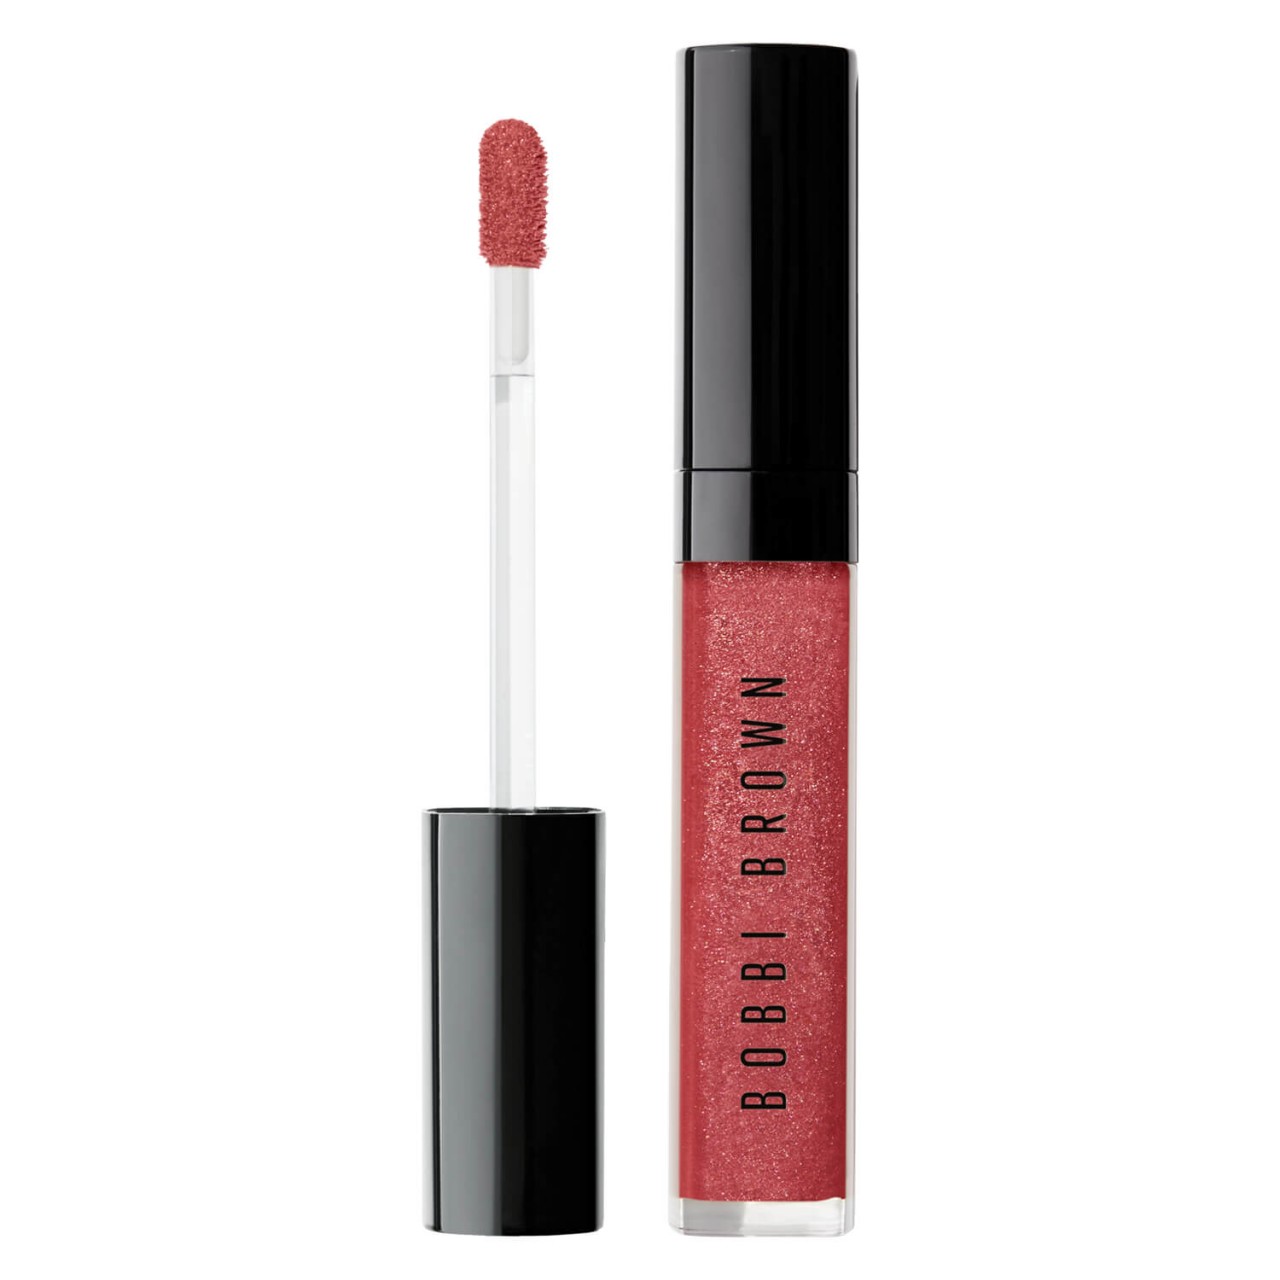 Bobbi Brown Crushed Oil Infused Gloss Shimmer 1pce